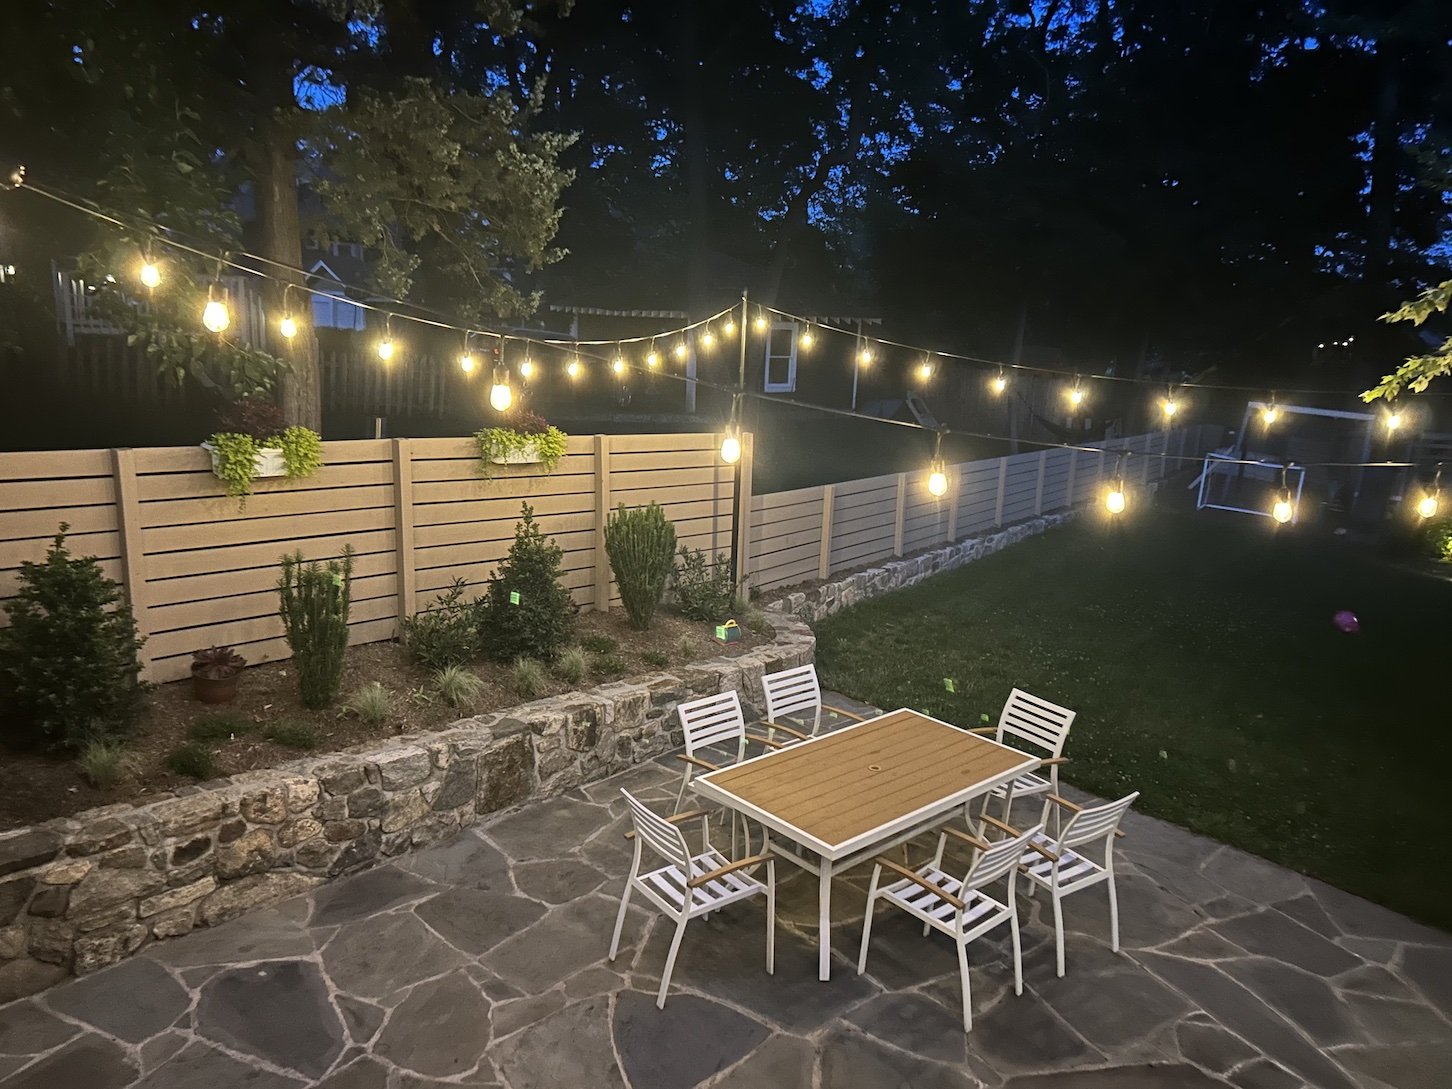 Back patio lighting with italian string lights above neutral colored patio furniture, a natural stone patio and a wooden fence.jpg